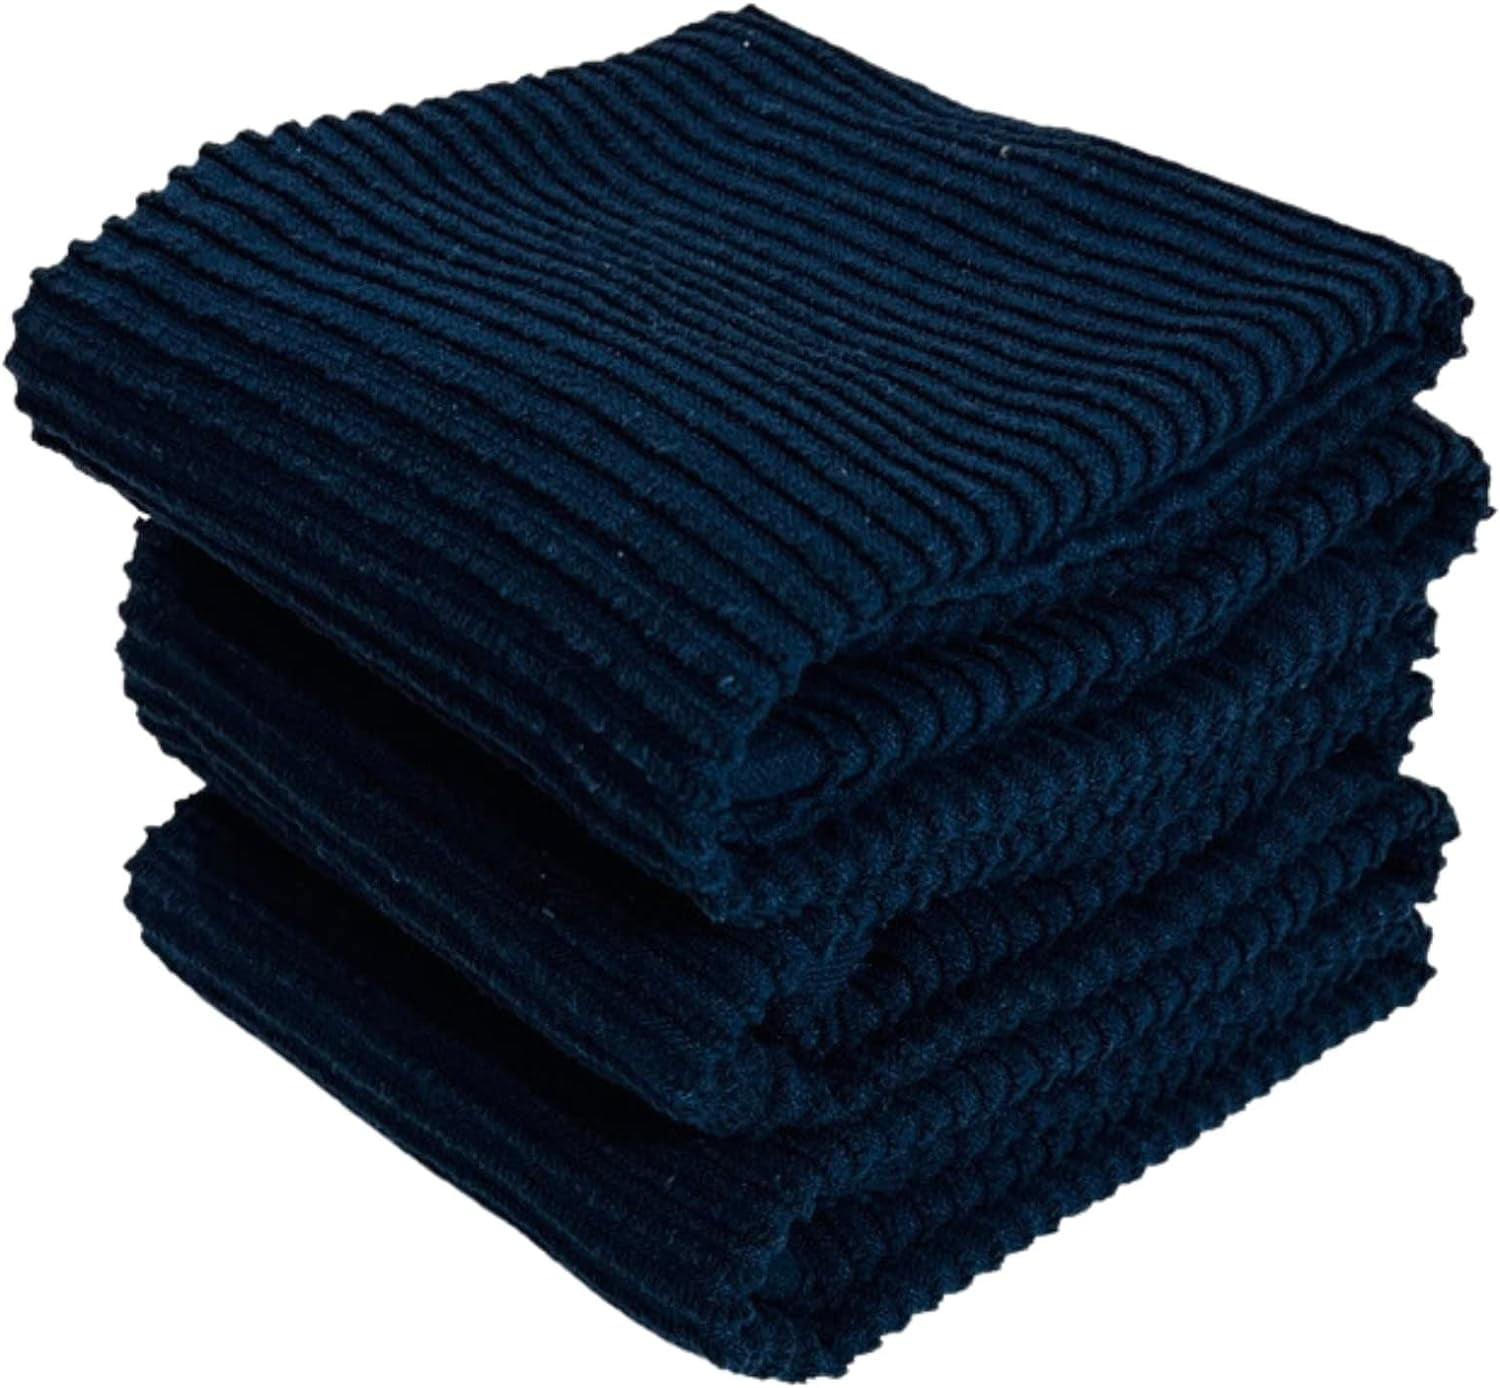 Serafina Home Oversized Solid Color Dark Navy Kitchen Towels: 100% Cotton  Soft Absorbent Ribbed Terry Loop, Set of 3 for Multi Purpose Everyday Use